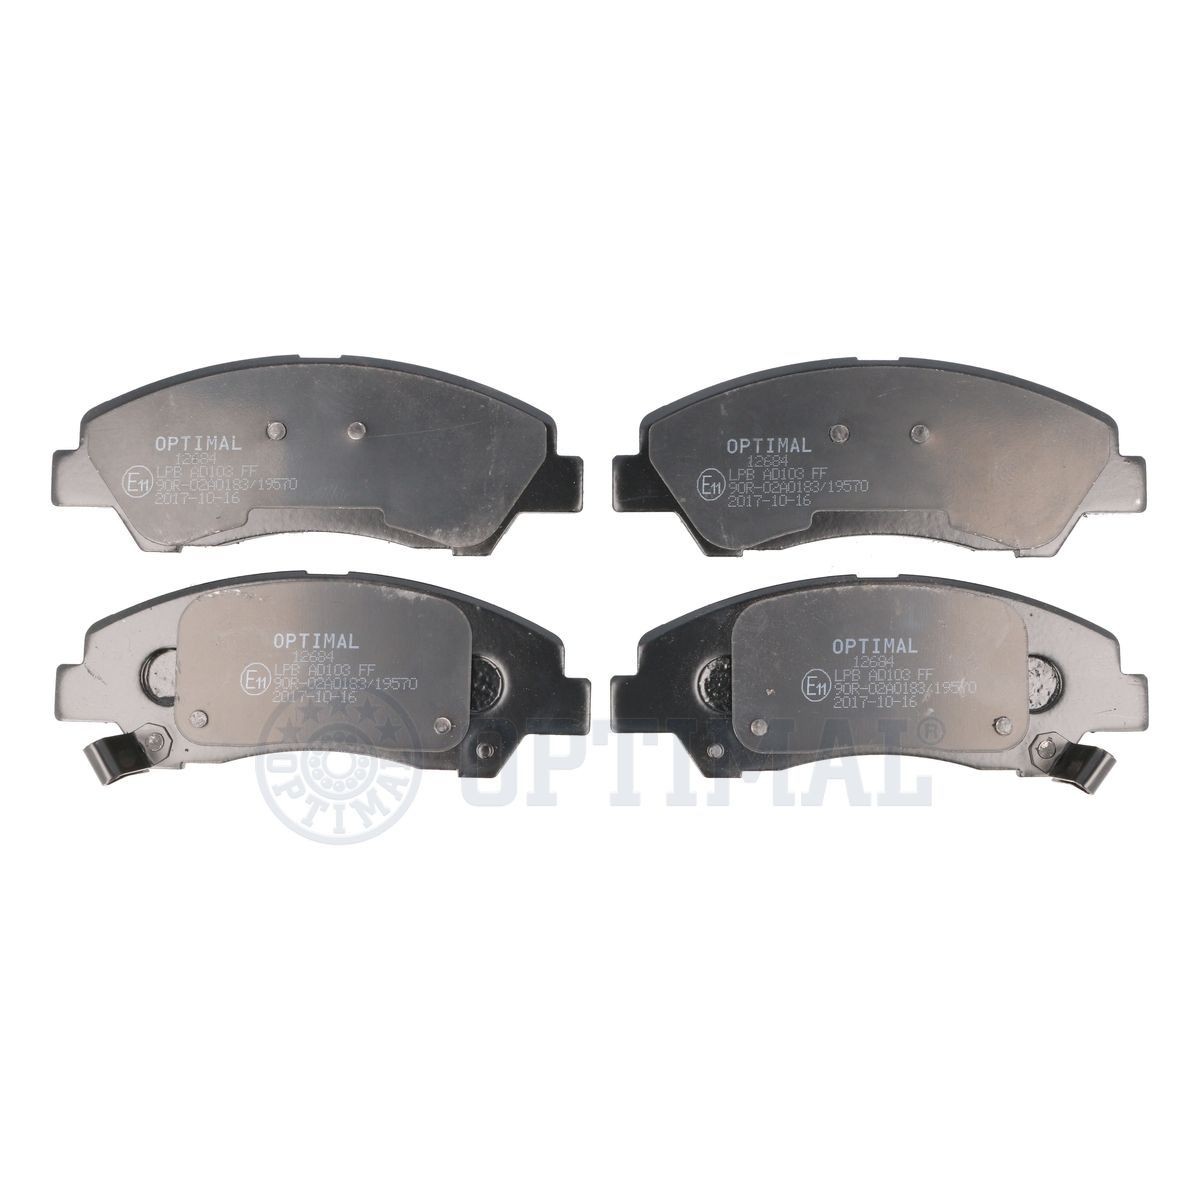 OPTIMAL BP-12684 Brake pad set Front Axle, with acoustic wear warning